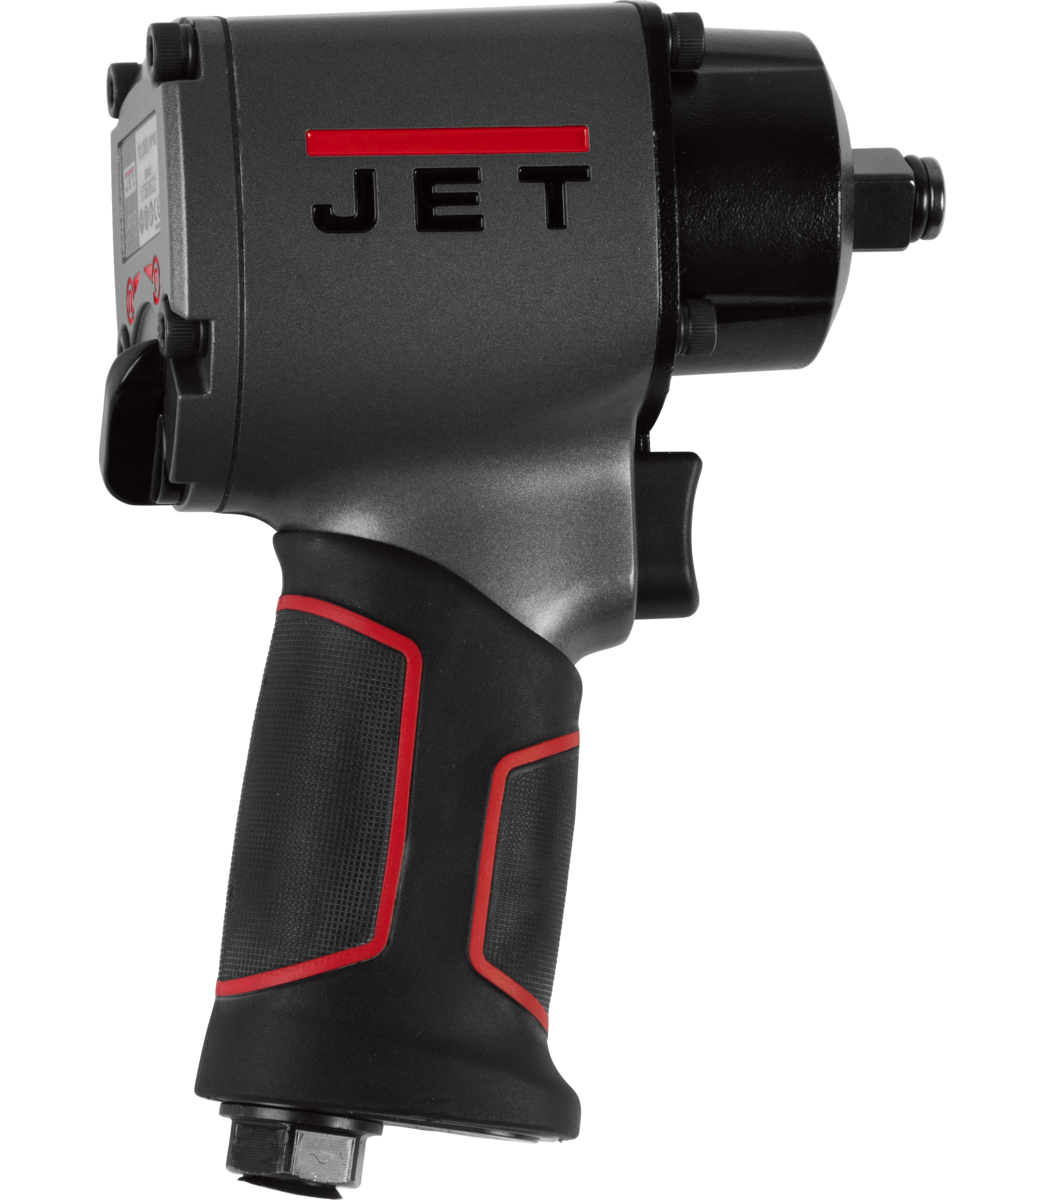 JAT-107, 1/2" Compact Impact Wrench